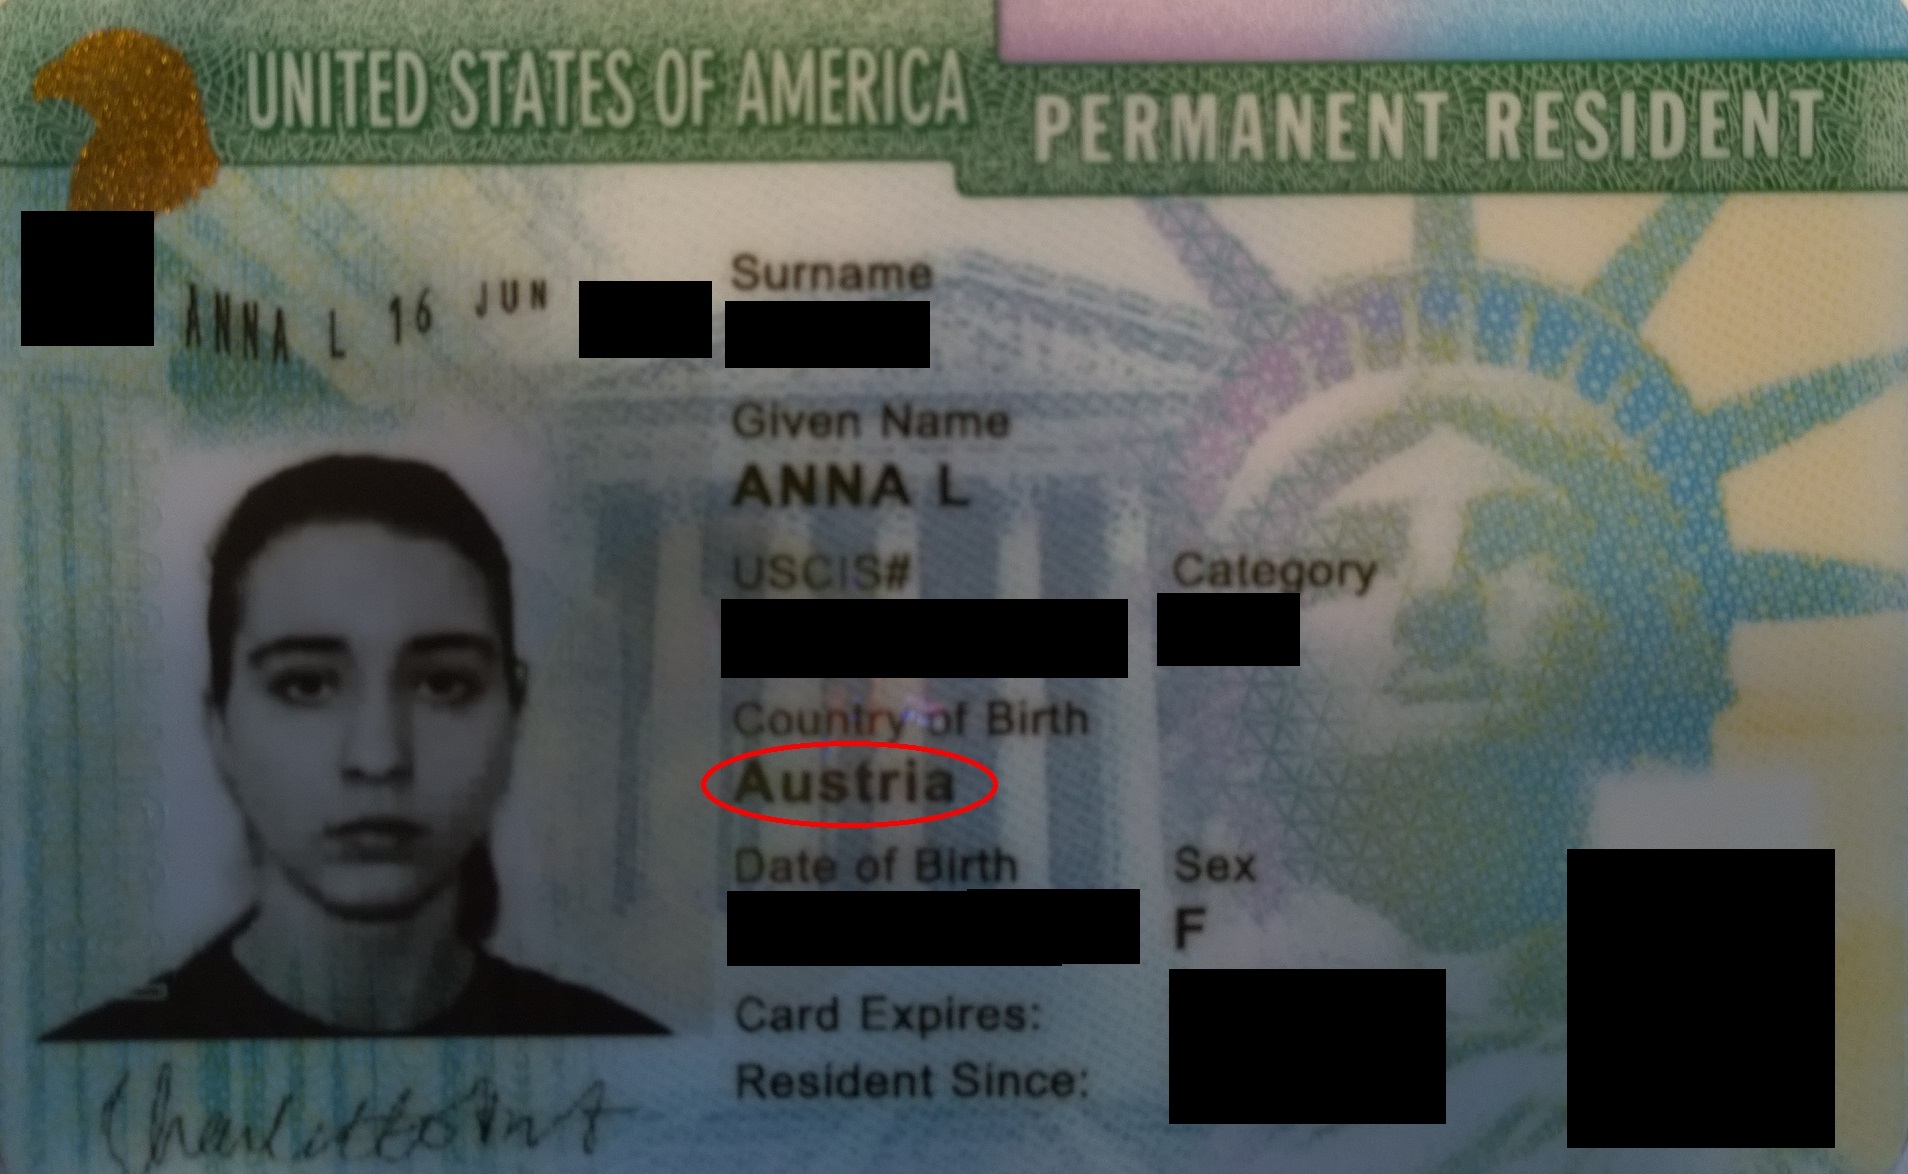 "This is the card I got in the mail in August 2015. Clearly there's been a mistake. I am not from Austria. I had to return this card so it could be replaced with a correct one. Then the saga began. The extension sticker on my old green card expired a couple months later (I actually traveled to/from Australia during this period and had trouble with people at the airport who didn't realise a green card extension was a legitimate thing). After that, I thought I would be fine because the new card was supposed to come soon. But then it didn't. After being kicked out of a GRE examination in summer 2016 because I didn't have the necessary ID, I had to get temporary proof of residence (which, by the way, is a very unofficial looking stamp in my passport). I ended up needing a few of these stamps, since they expired in smaller and smaller intervals, and I didn't have my card yet."